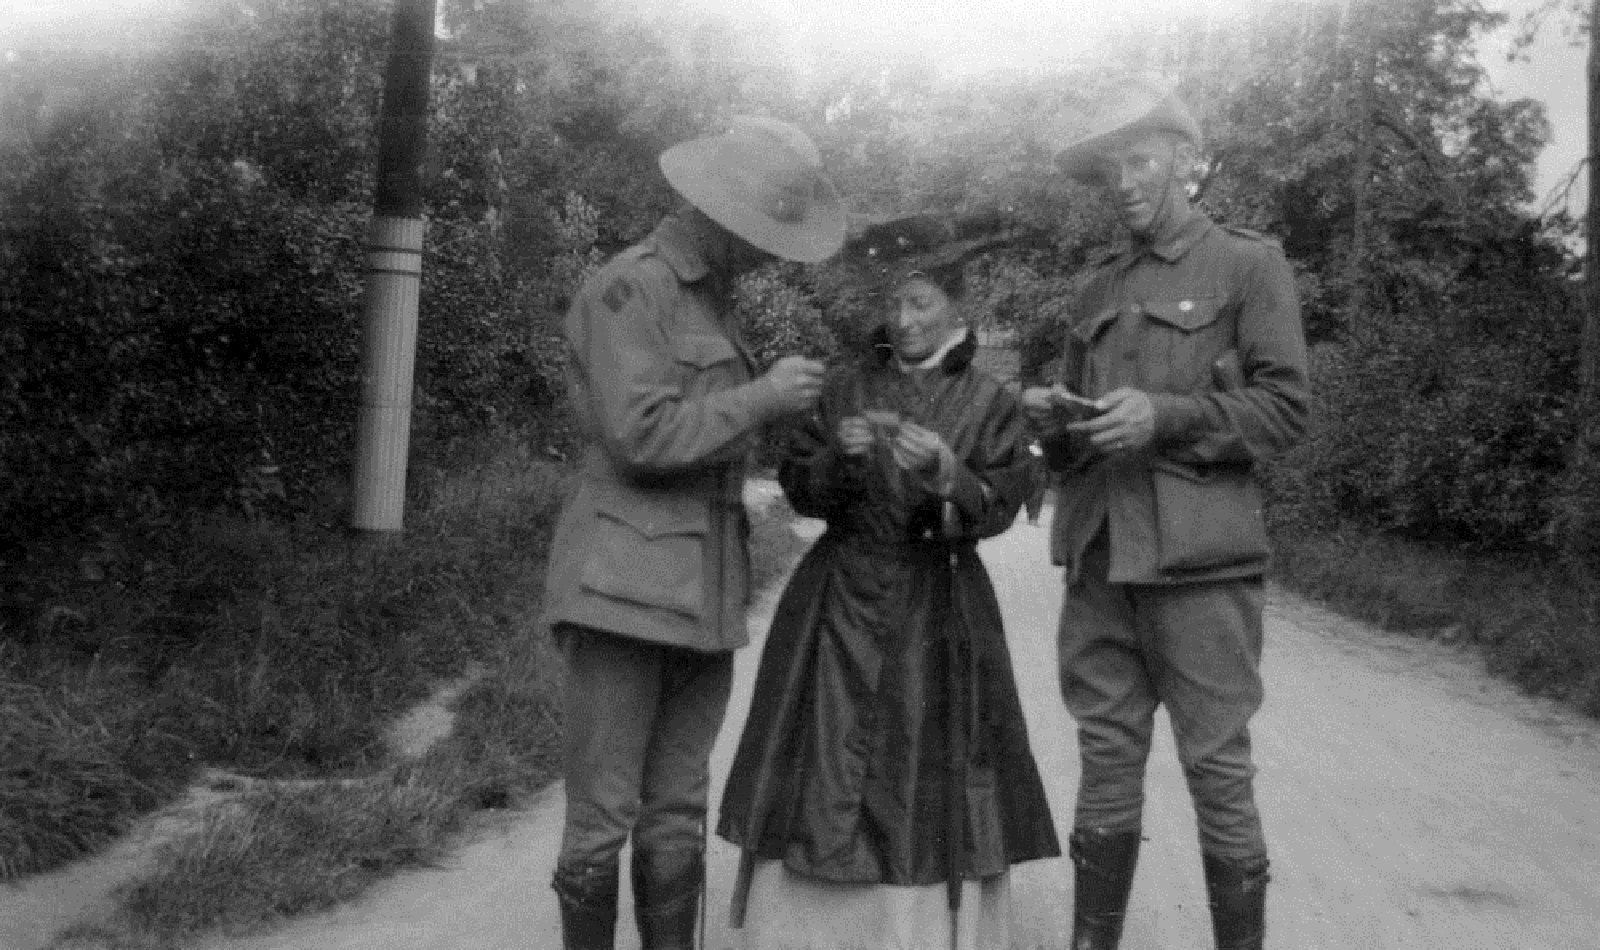 Two soldiers showing their photographs to a woman, all standing in a laneway